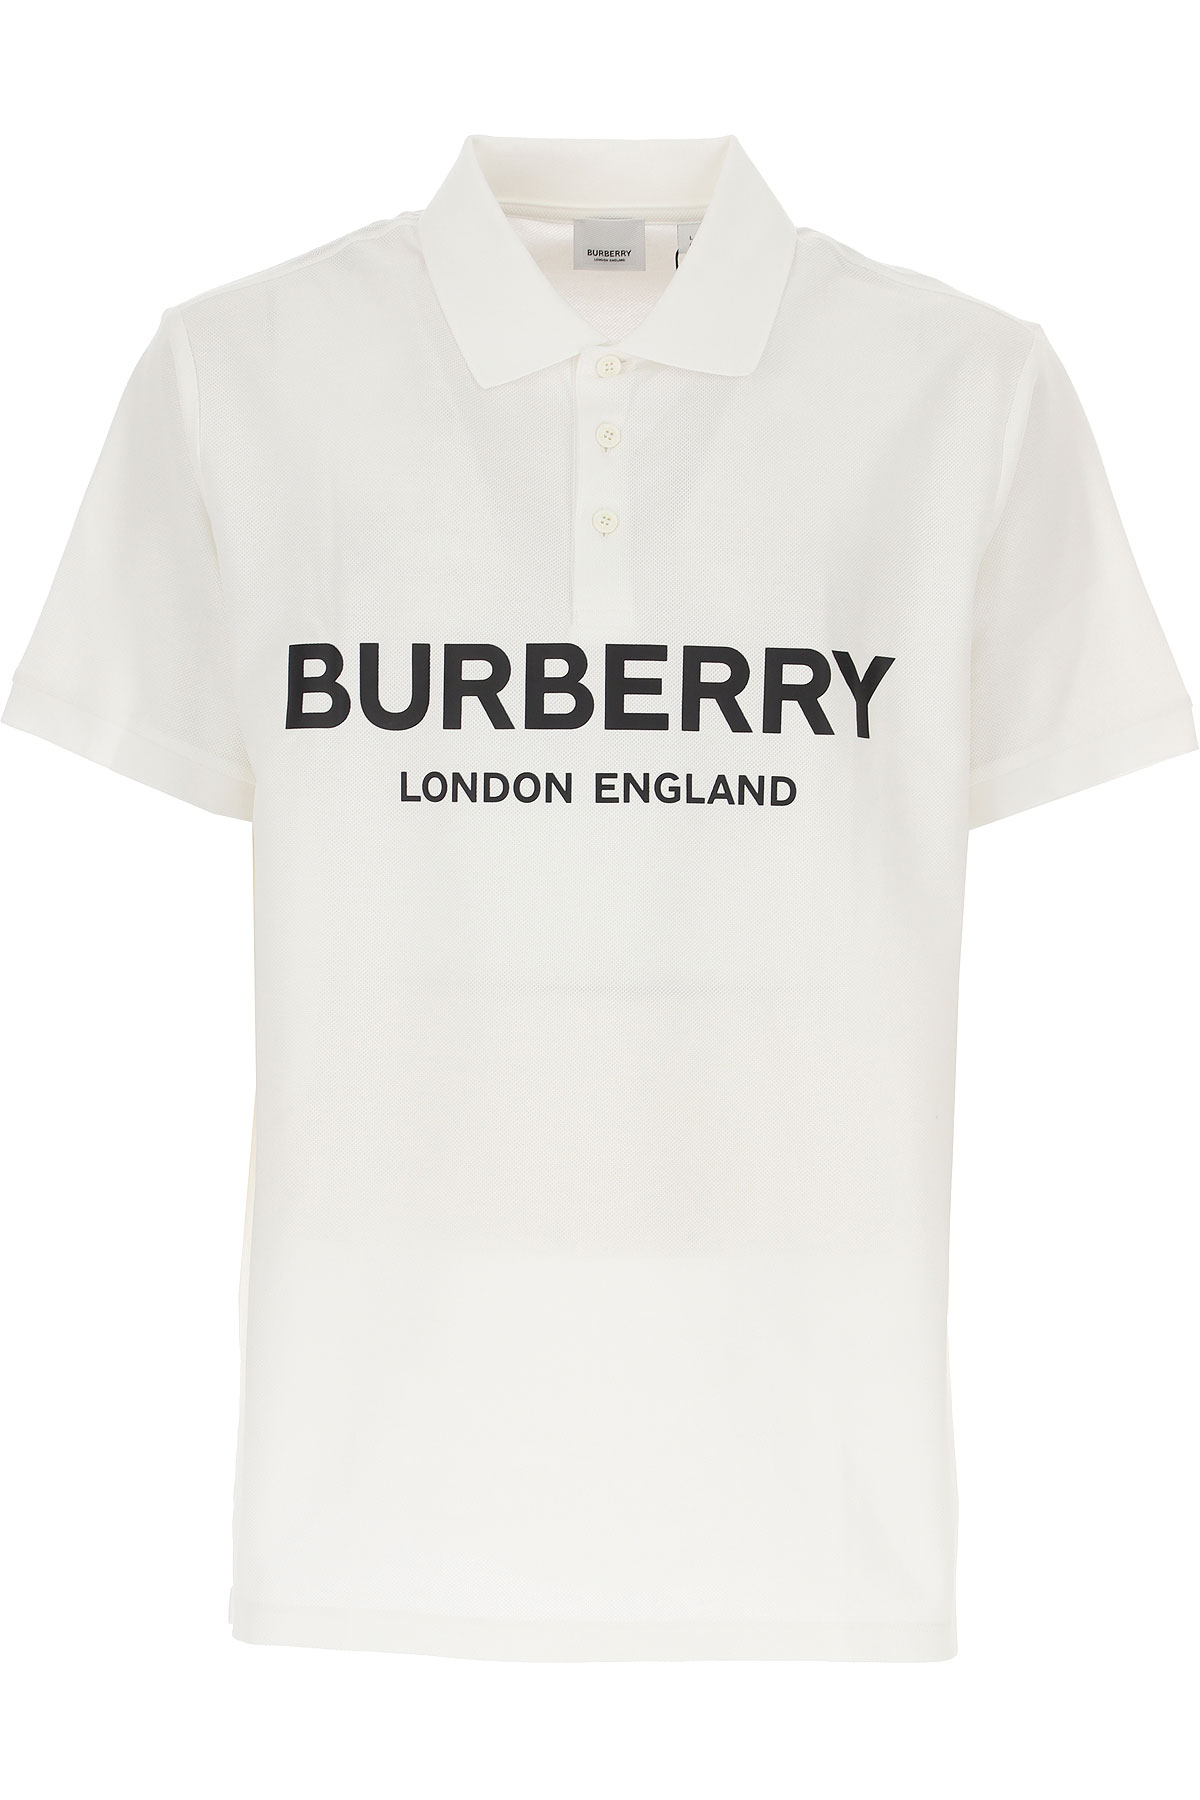 Mens Clothing Burberry, Style code: 8009498-1001-